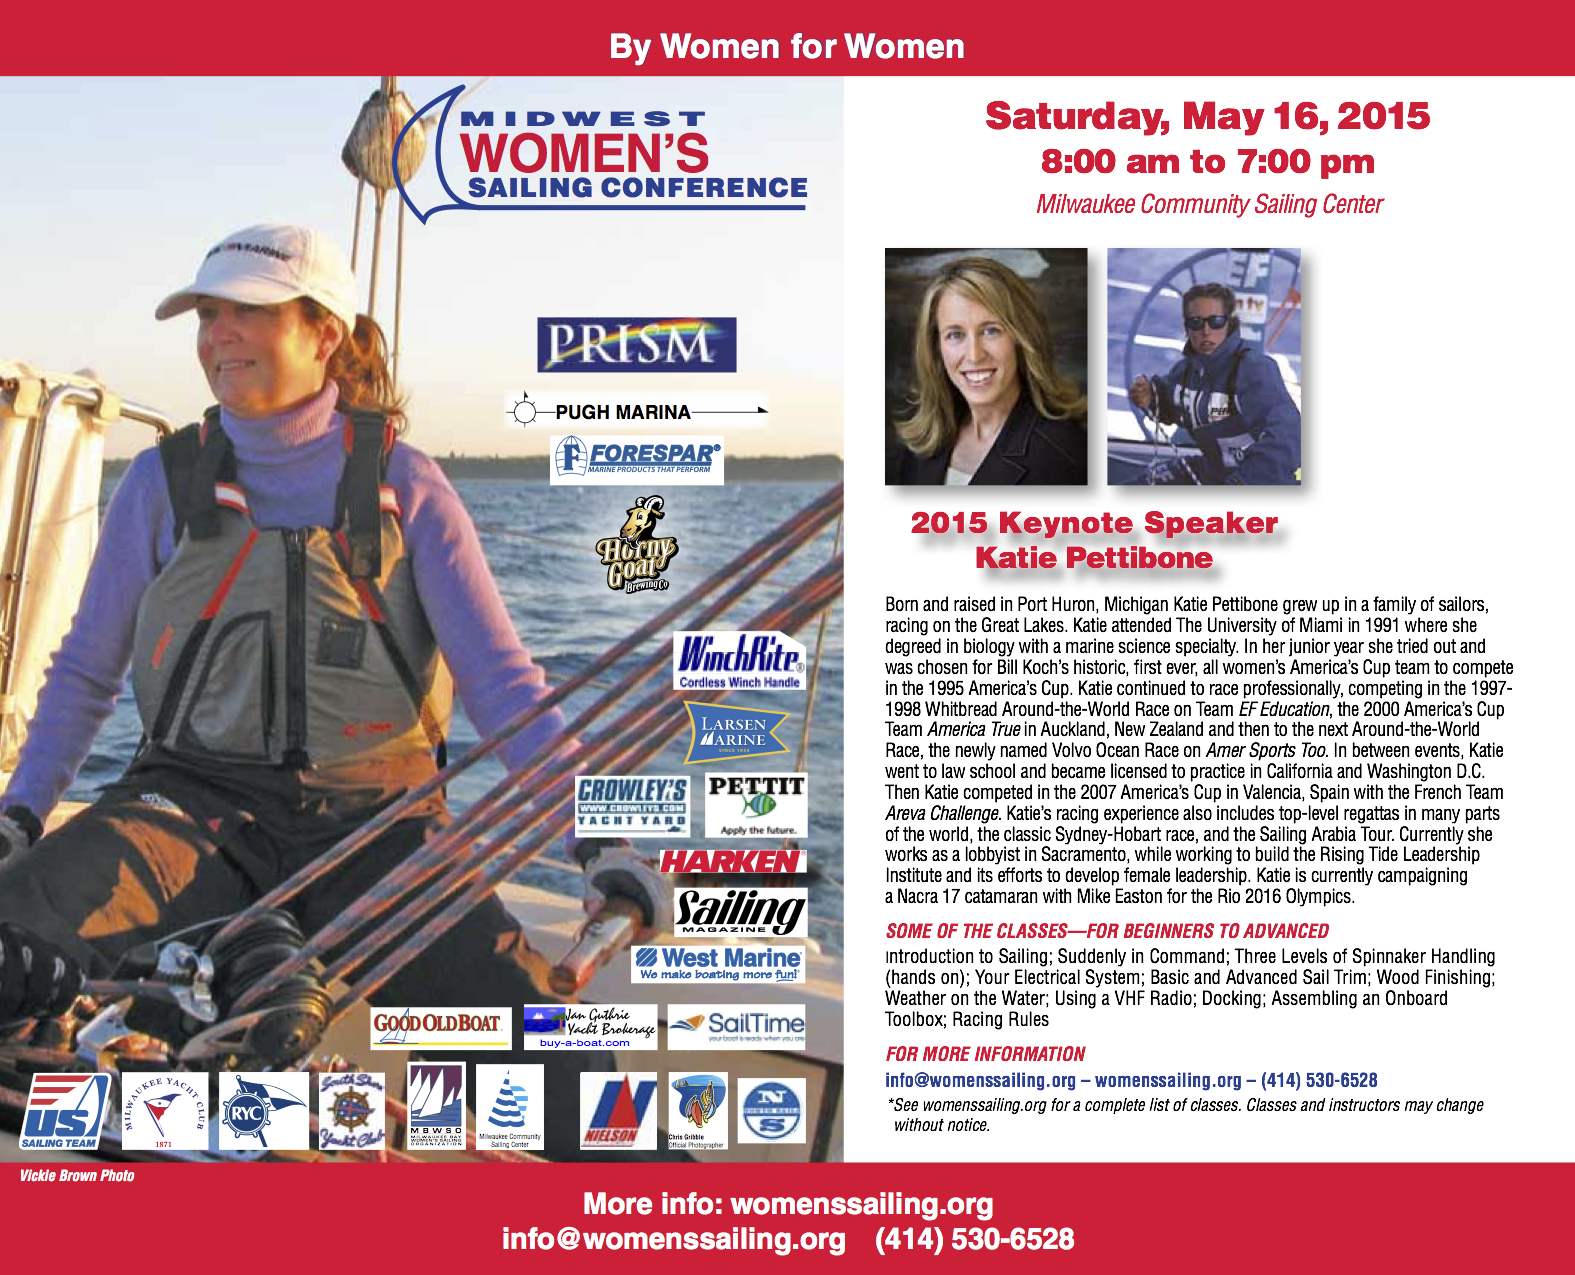 Growing Participation - Midwest Women's Sailing Conference